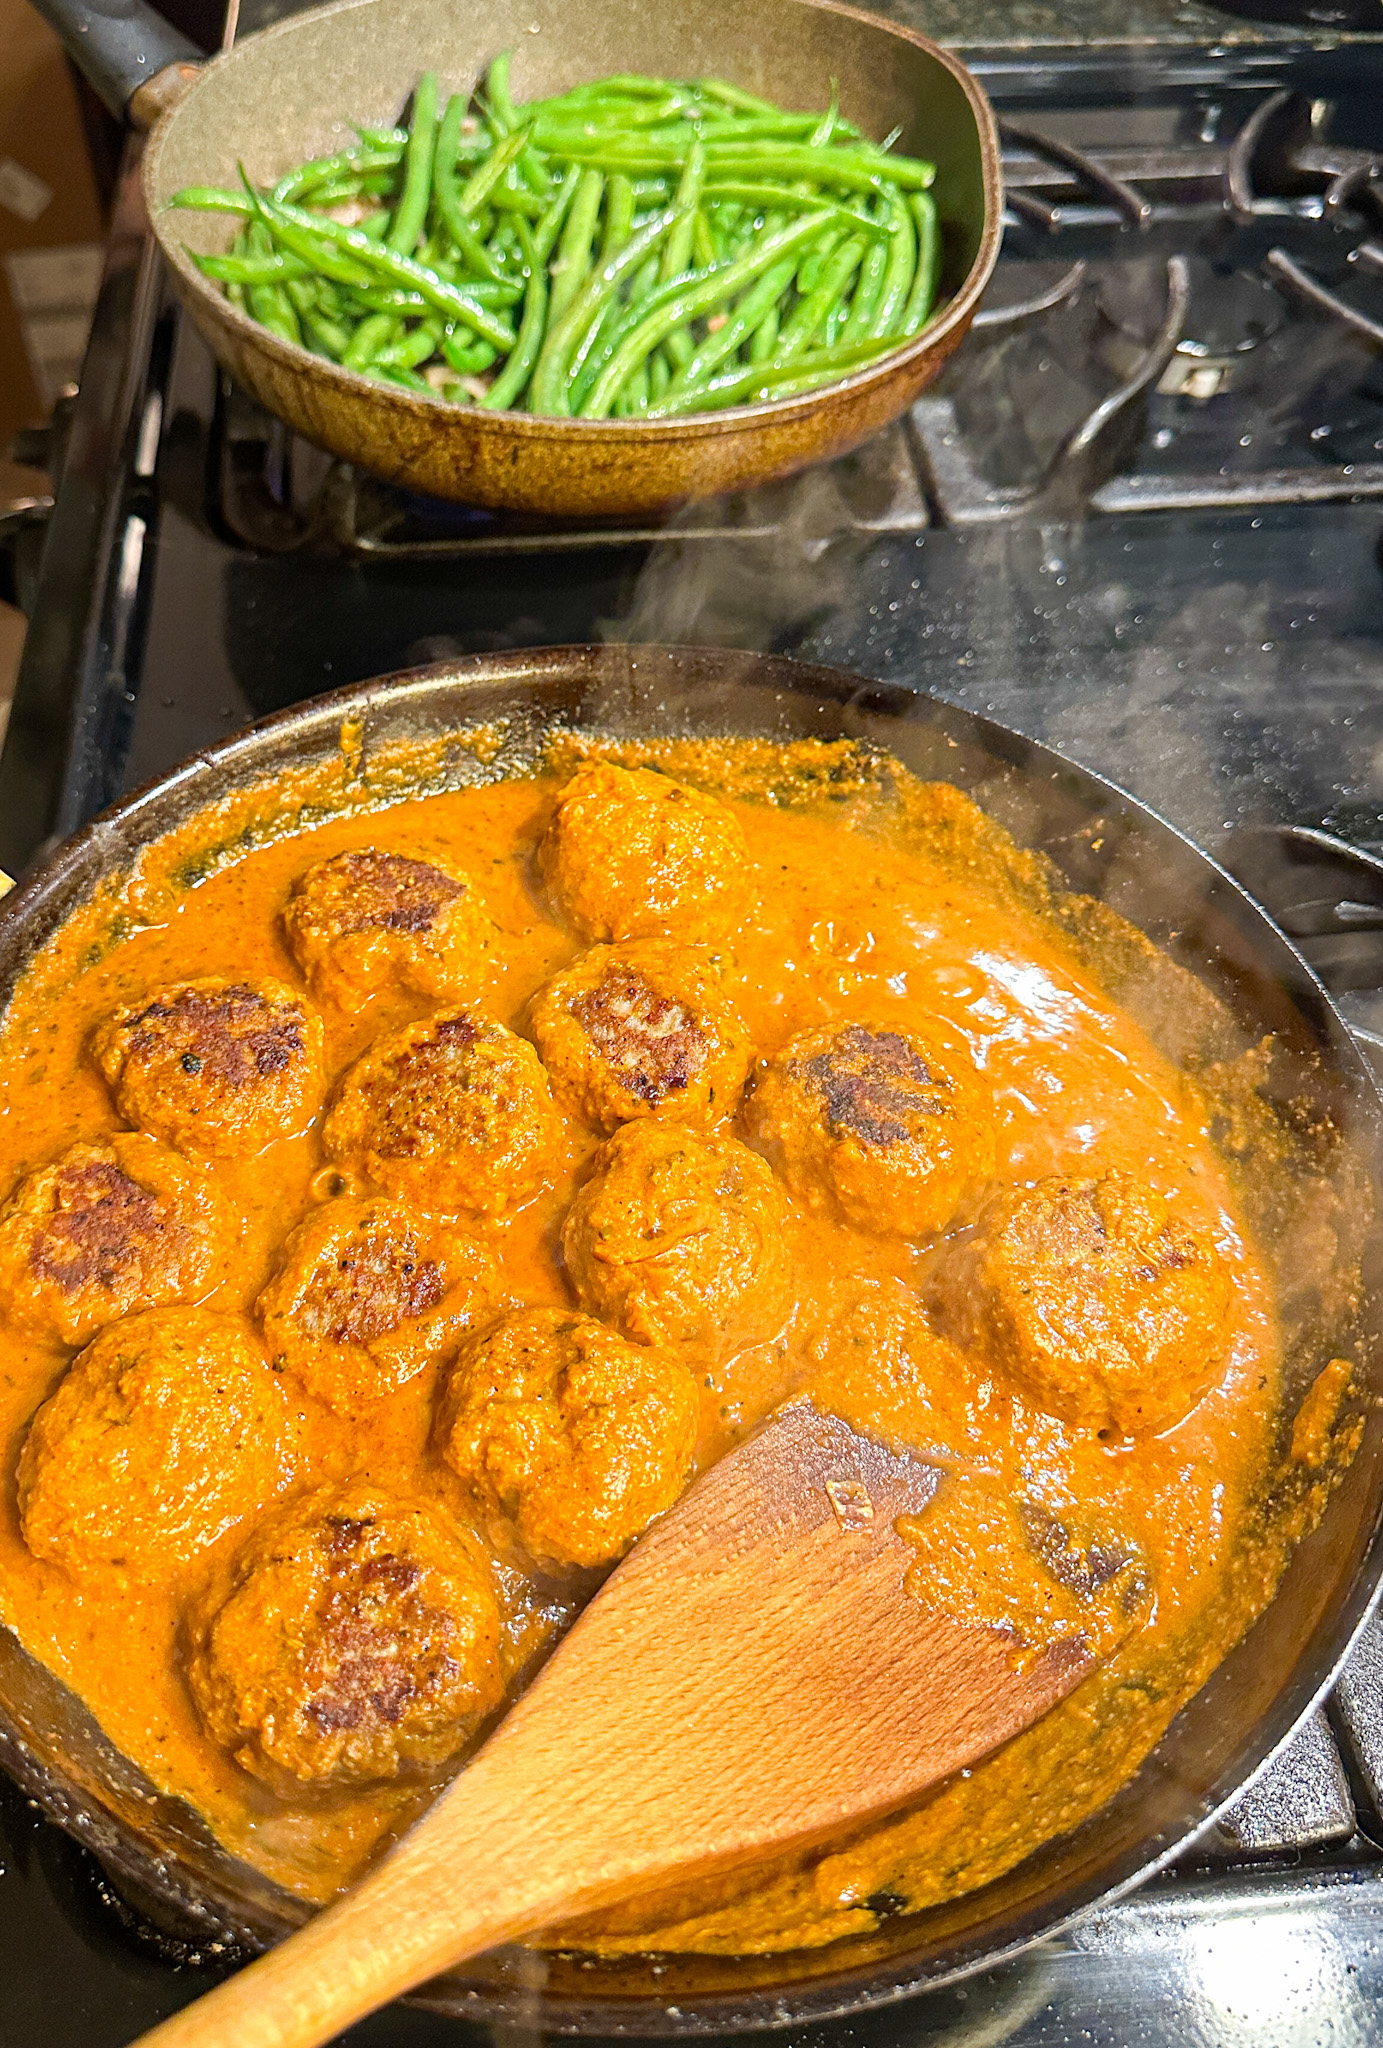 Meatballs simmering in a sauce with a pan of green beans in the background on a stove